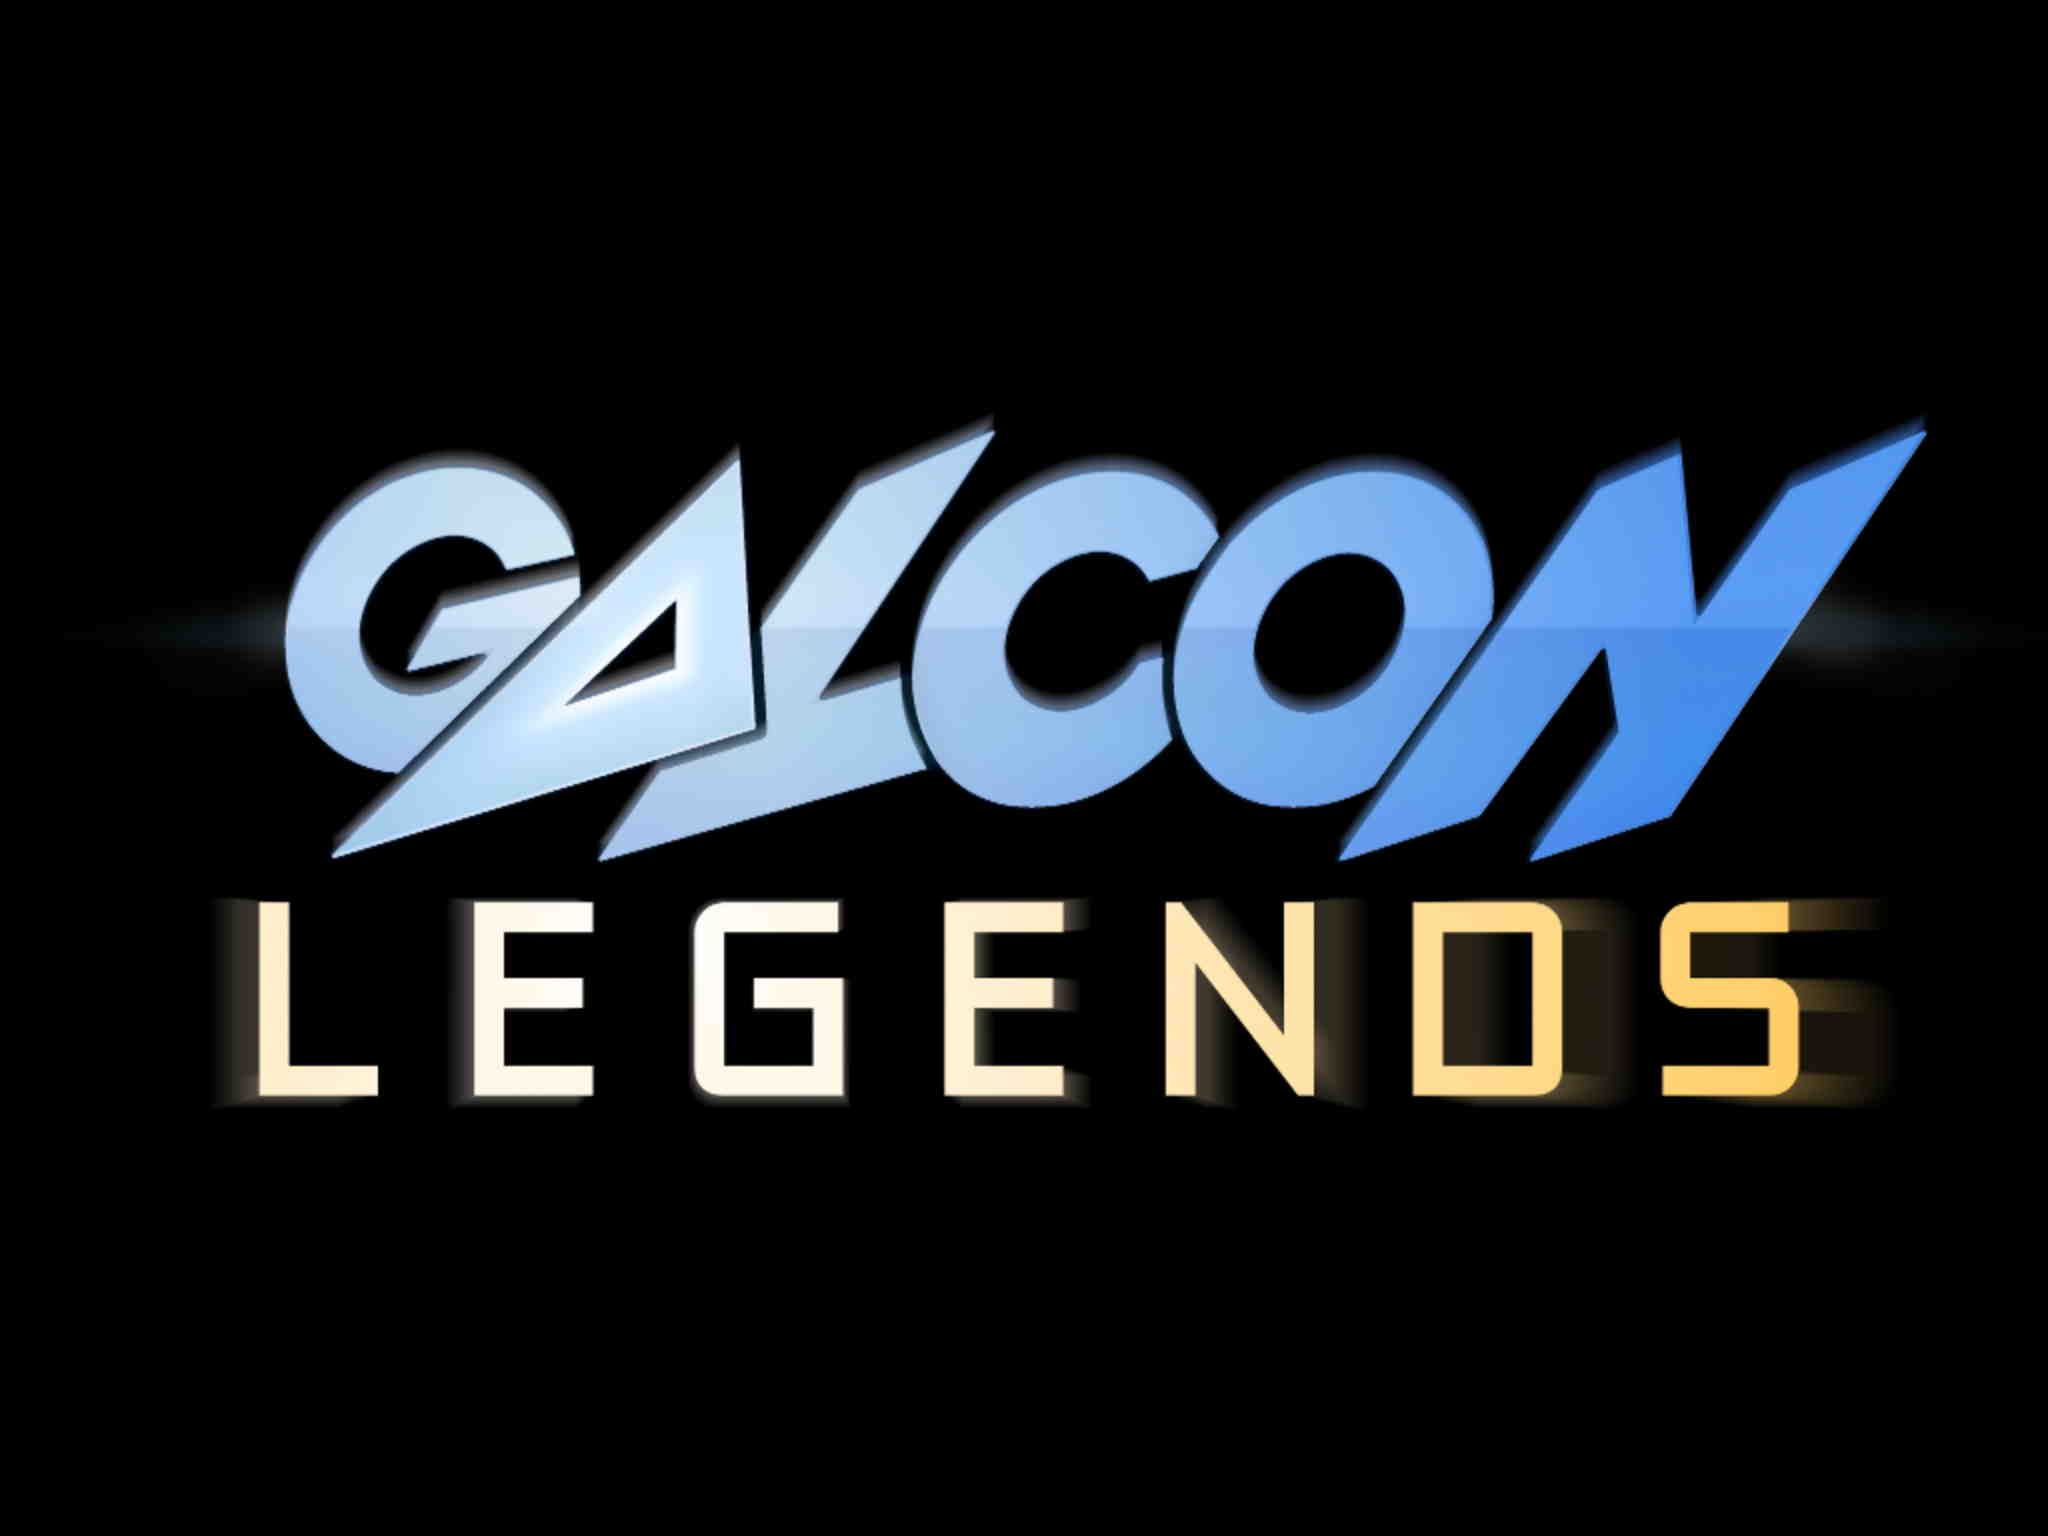 Galcon_Legends_01